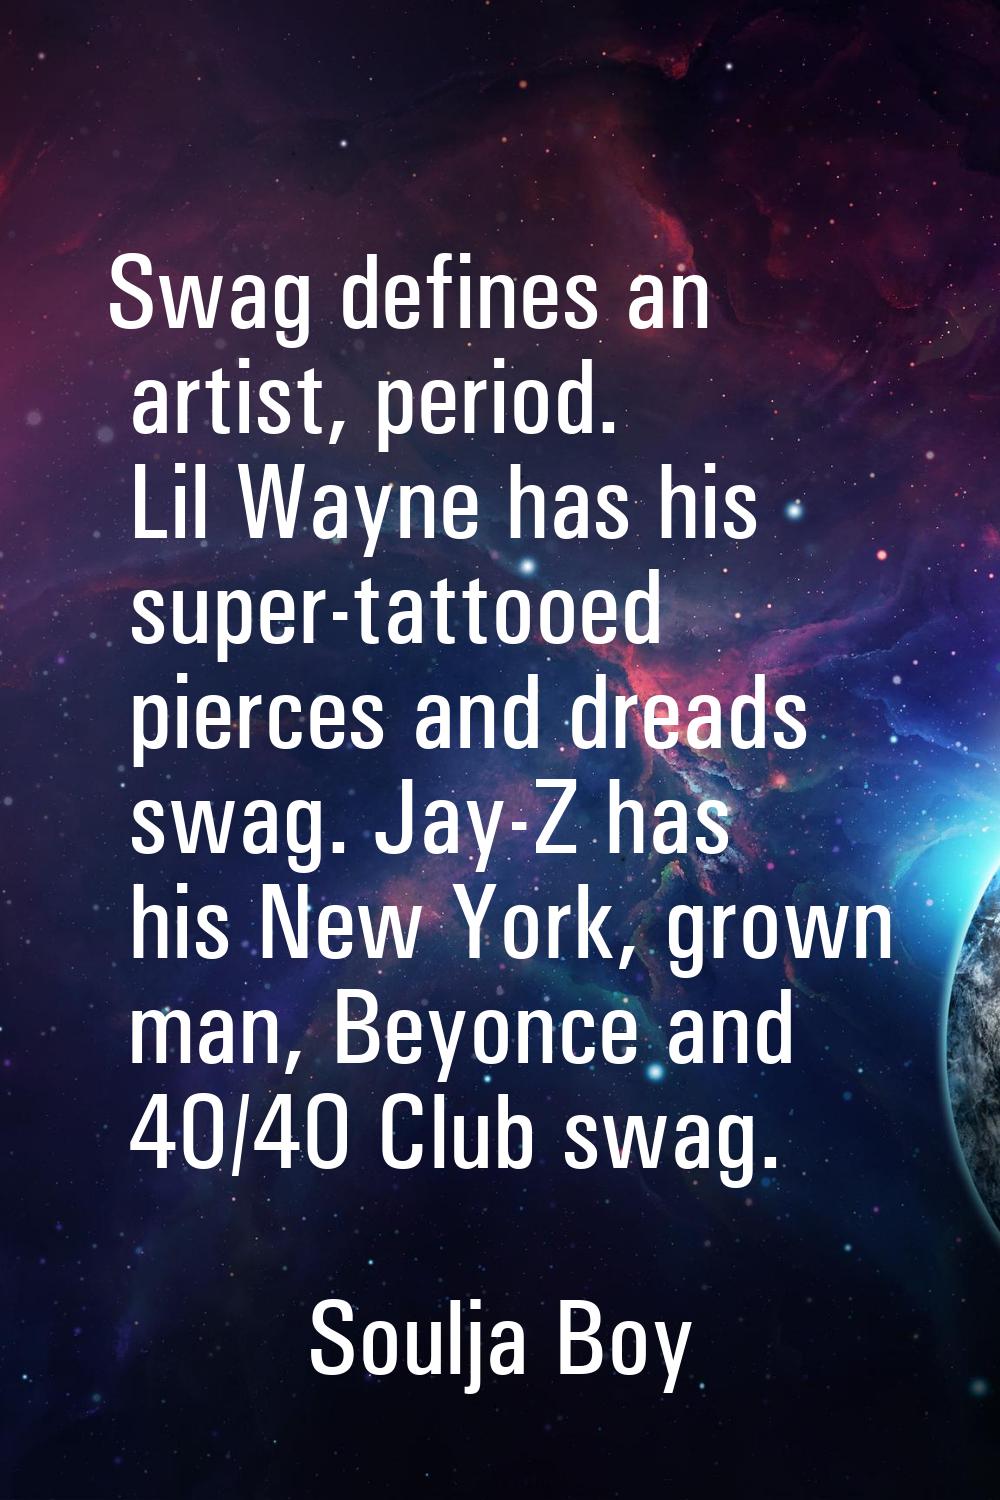 Swag defines an artist, period. Lil Wayne has his super-tattooed pierces and dreads swag. Jay-Z has